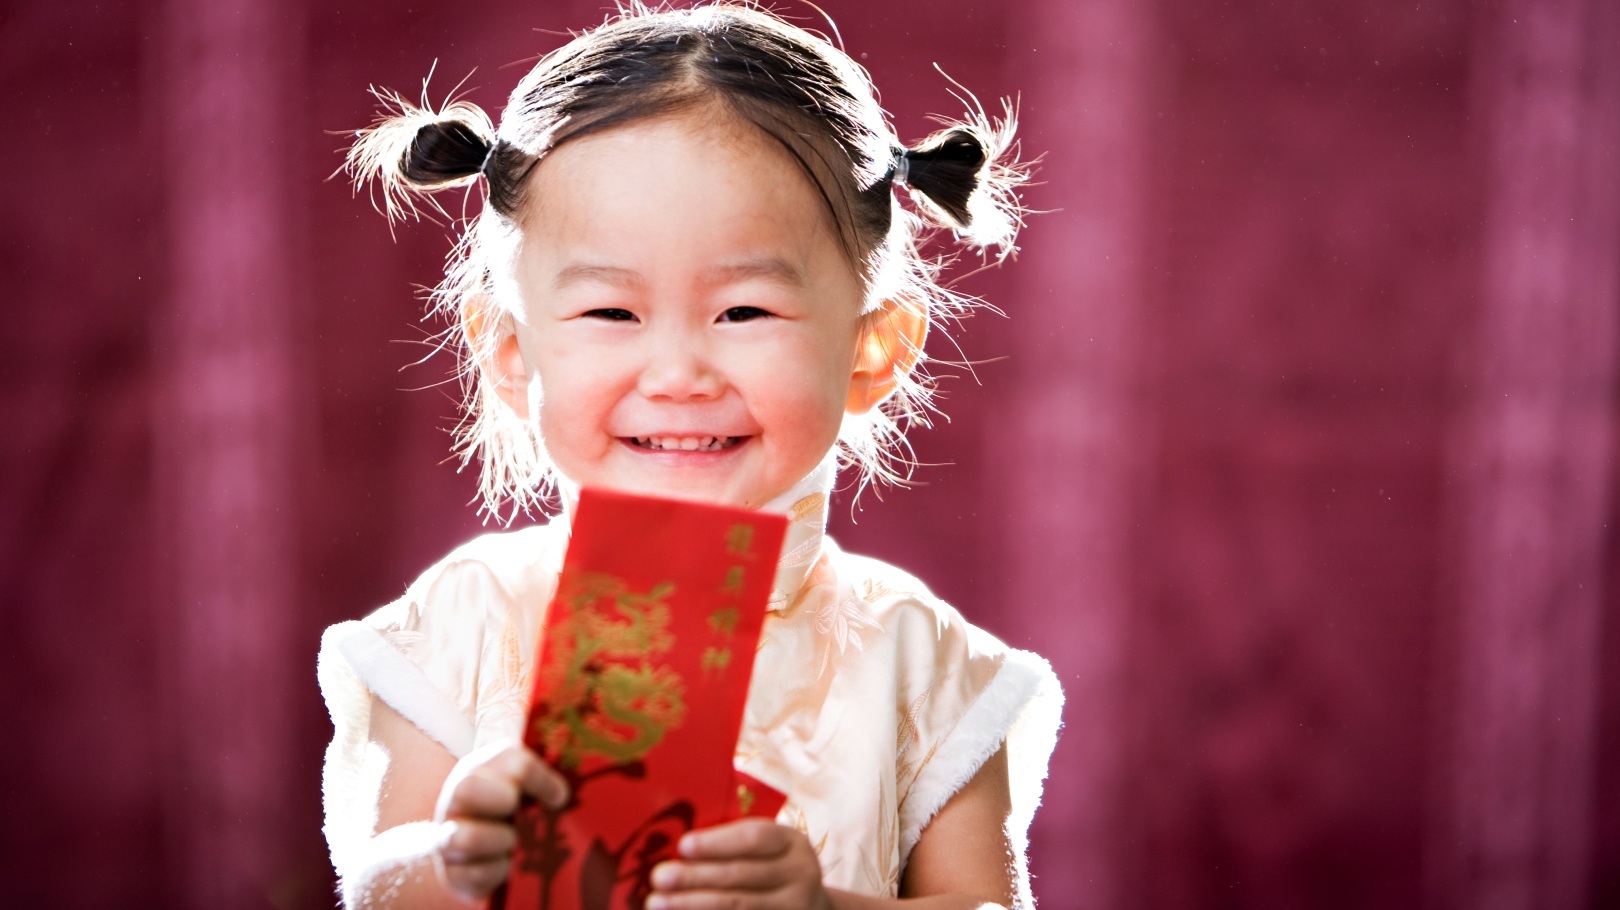 Want to usher in this Lunar New Year feeling prosperous rather than penniless? Read this before starting your festive preparations
